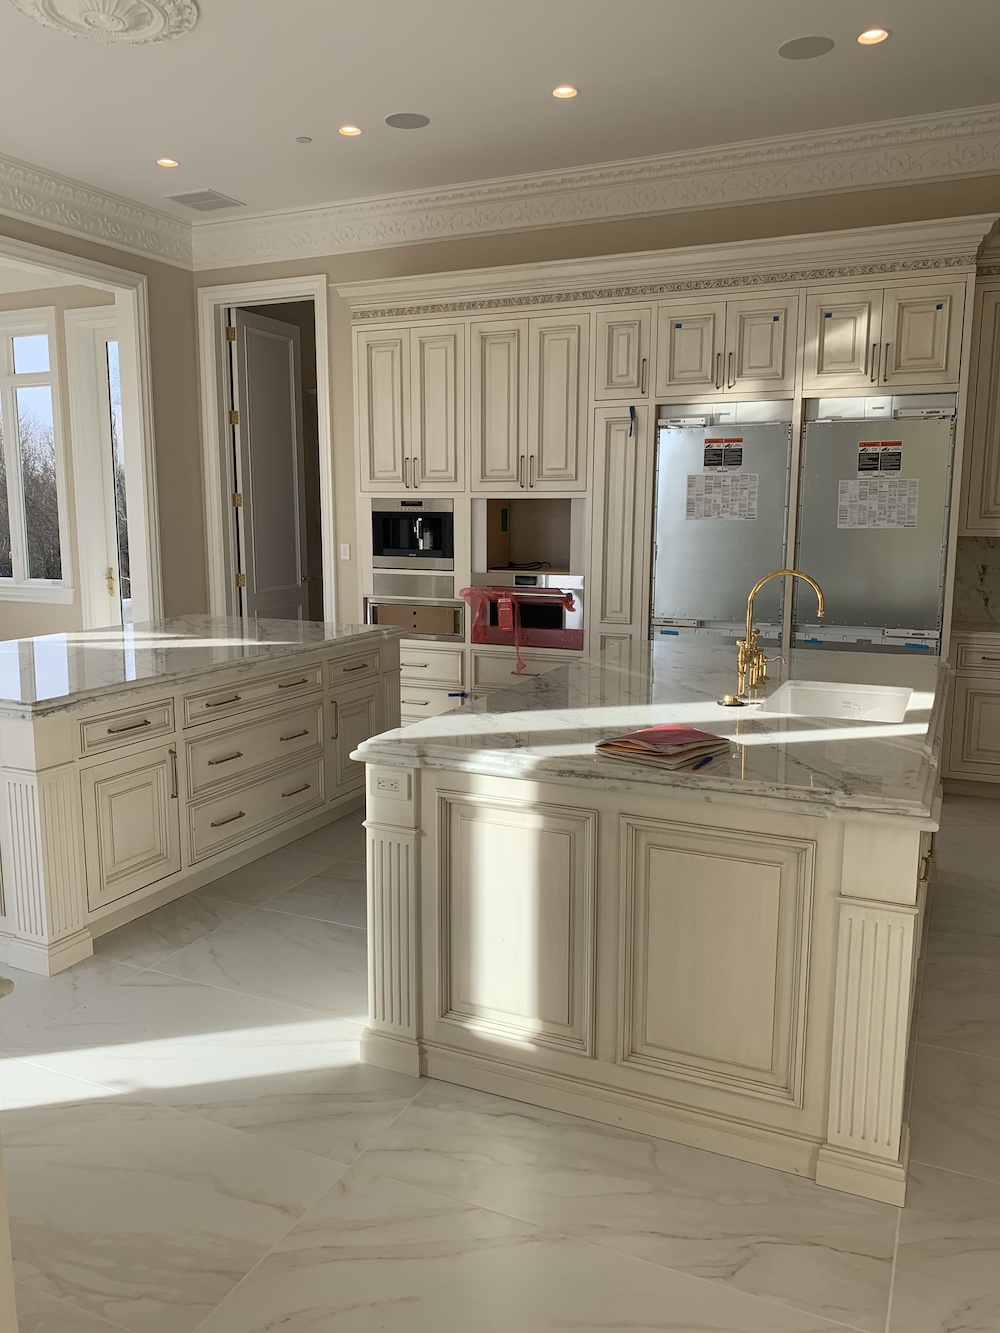 Luxury Kitchen with beige and neutral cabinets, two islands, marble flooring and countertops